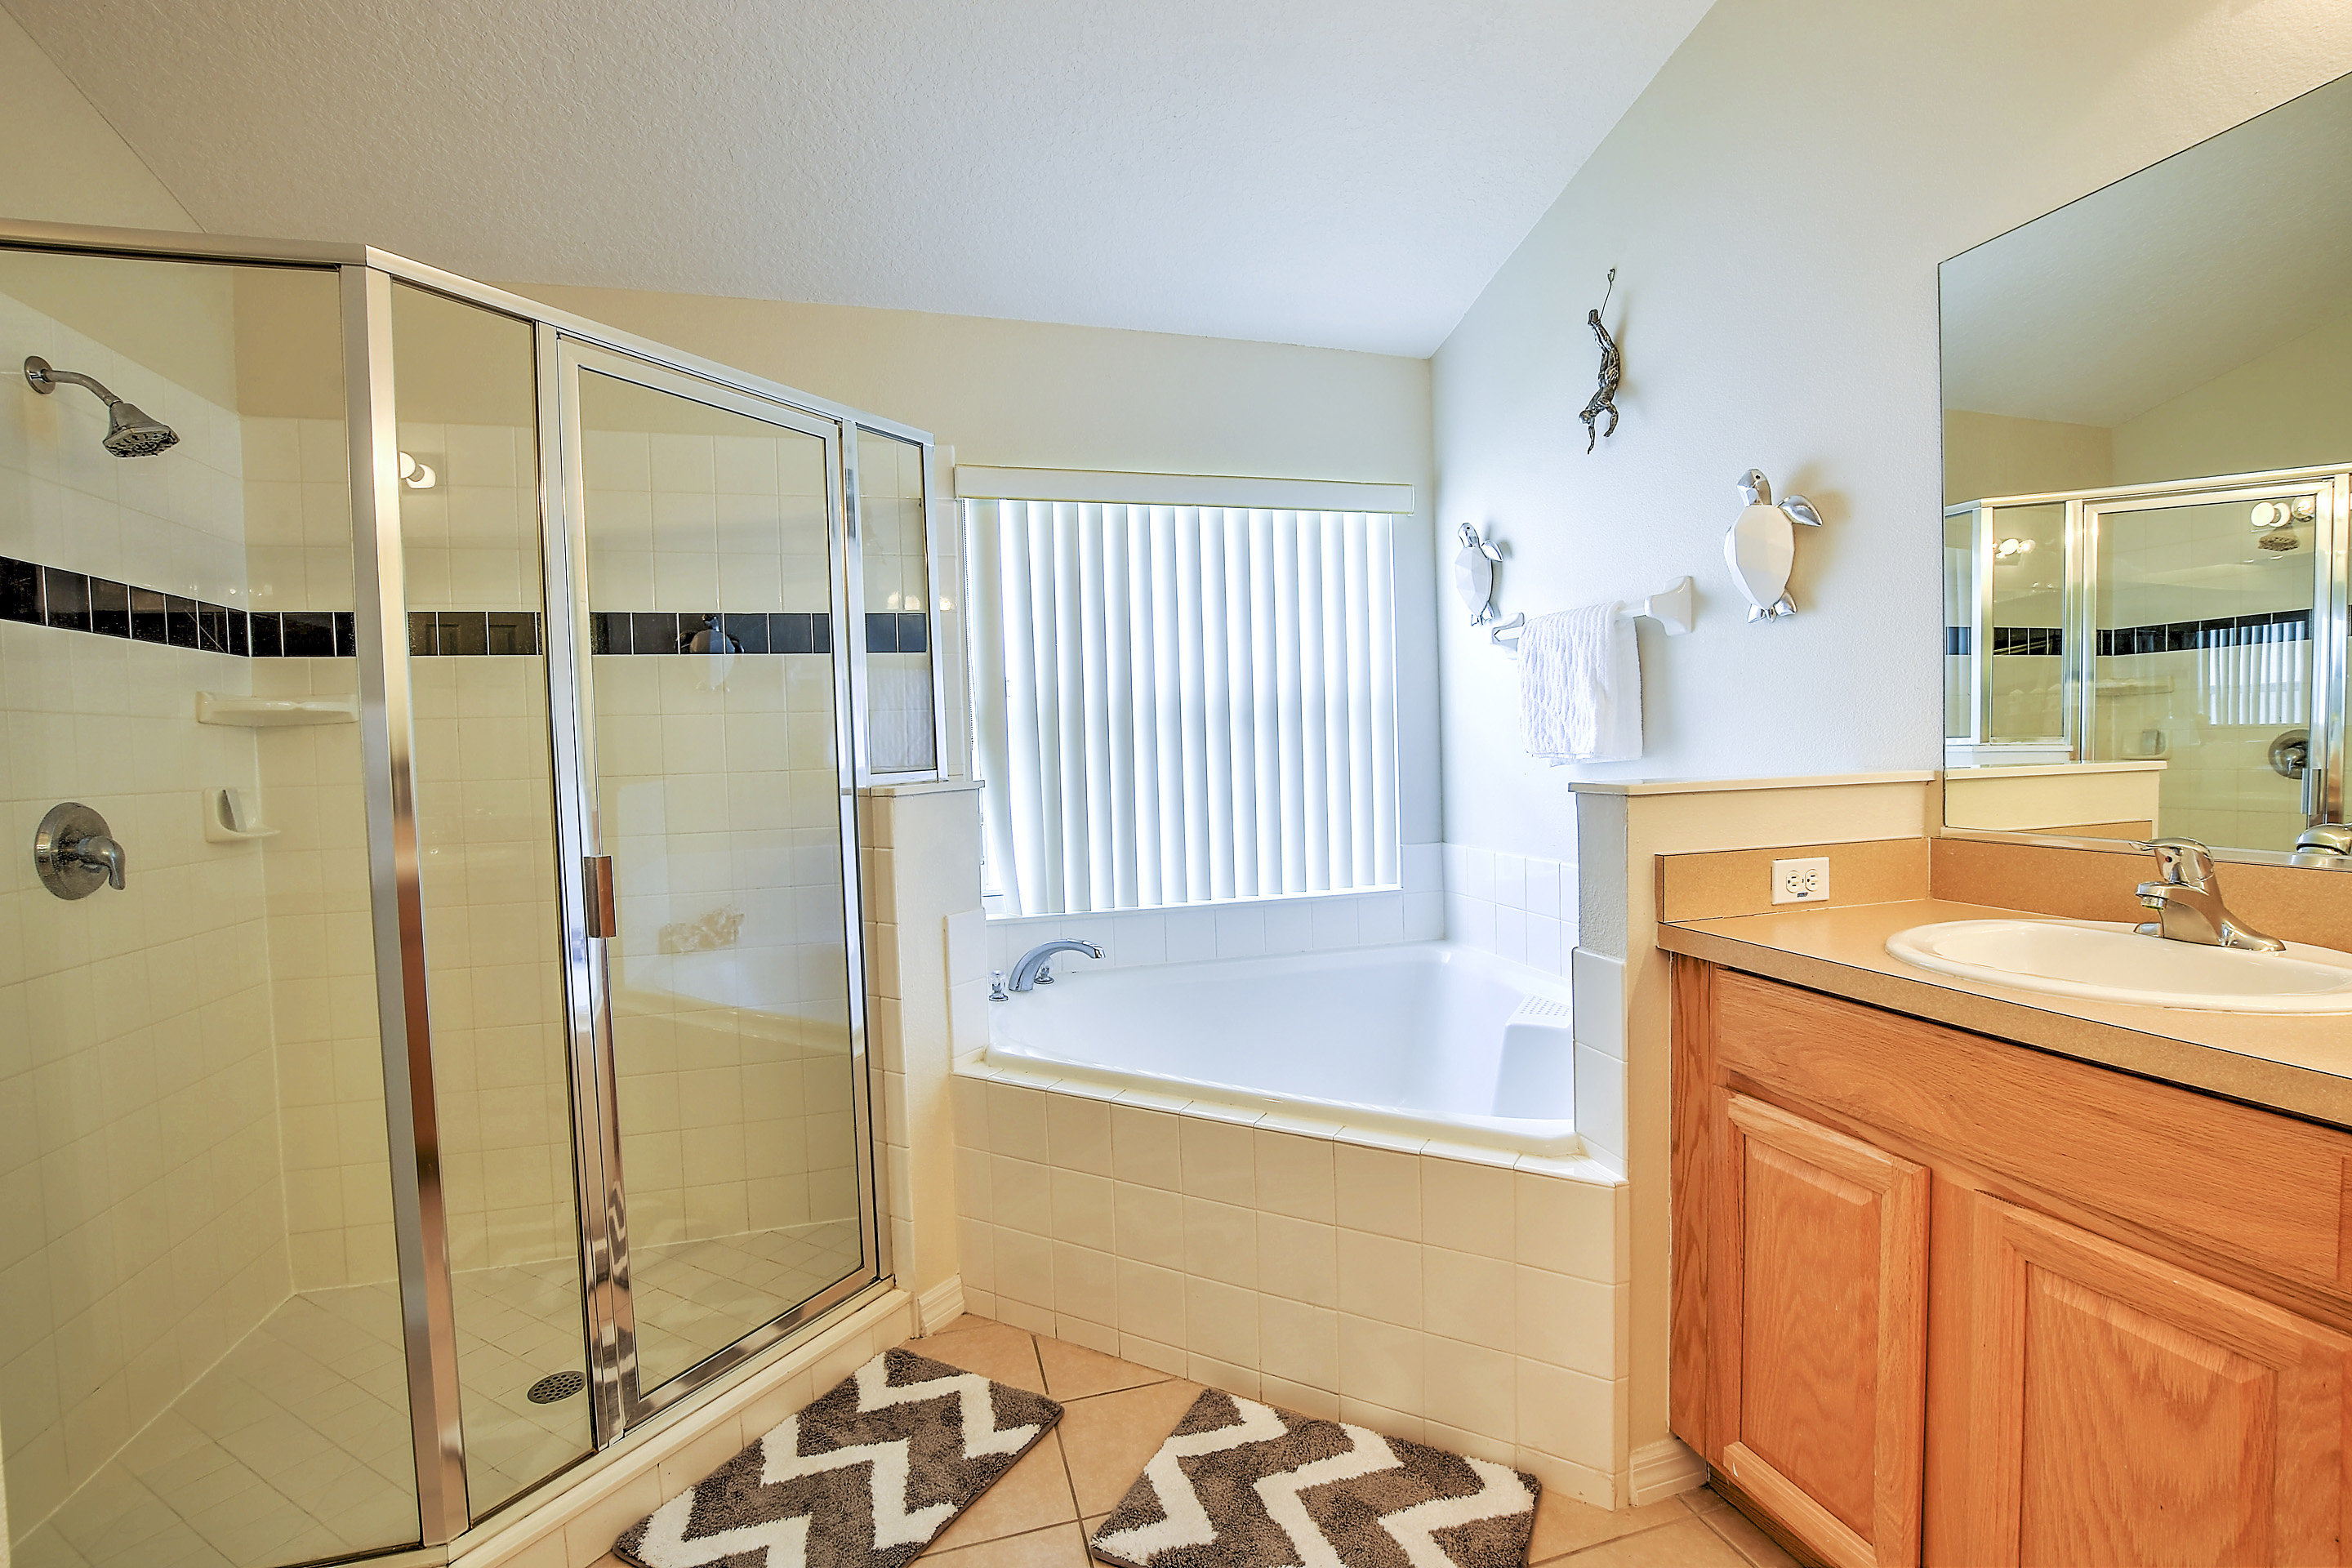 Guest Reviews. Cozy corner bath and massive walk-in shower